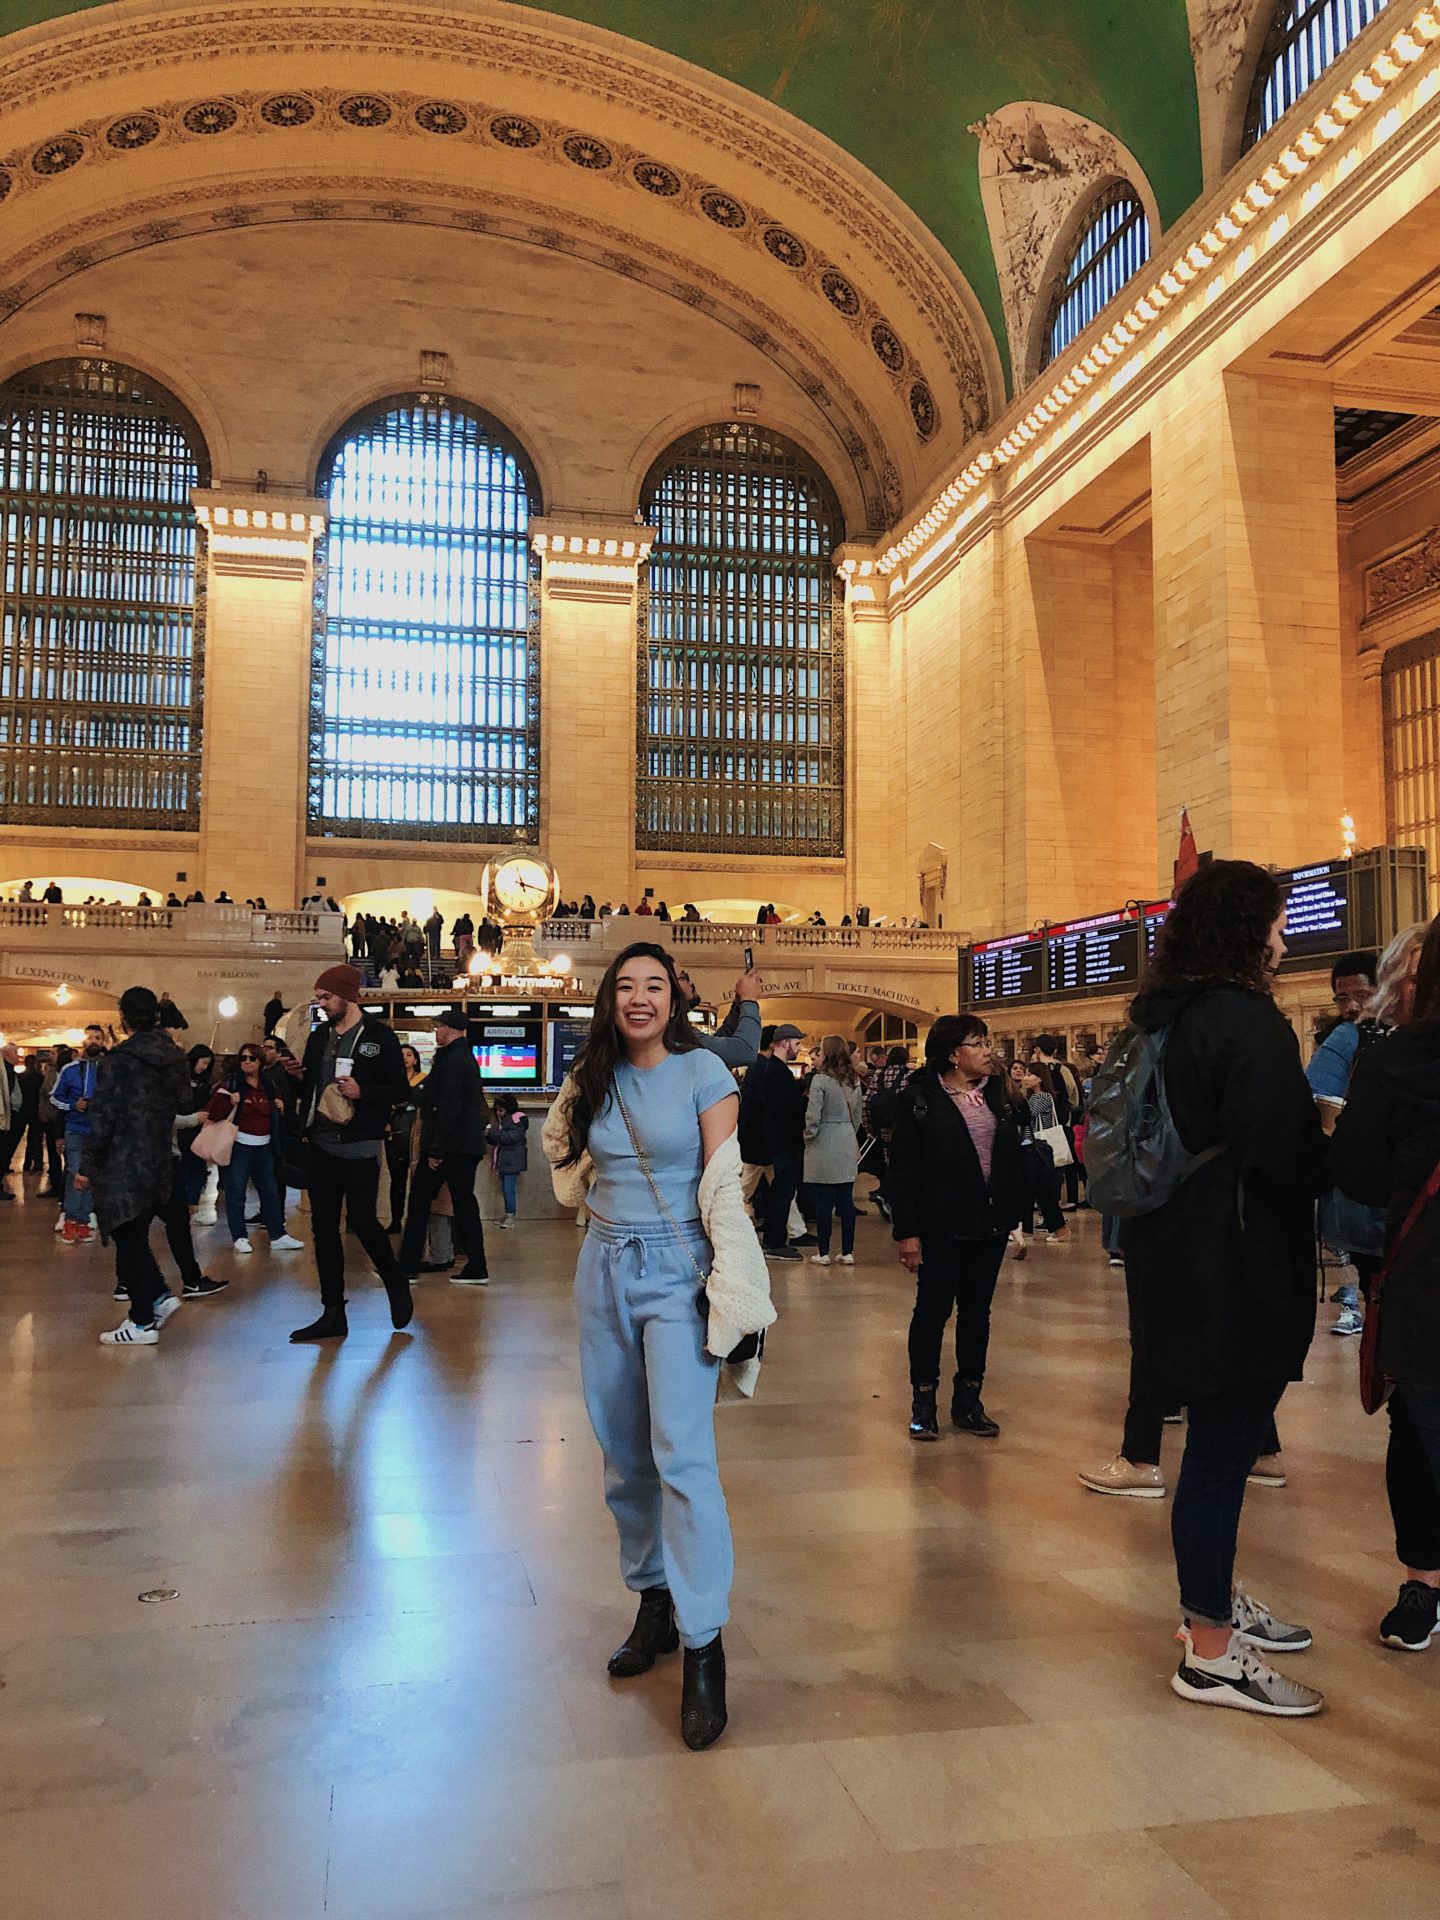 Visiting Grand Central Station in New York City 